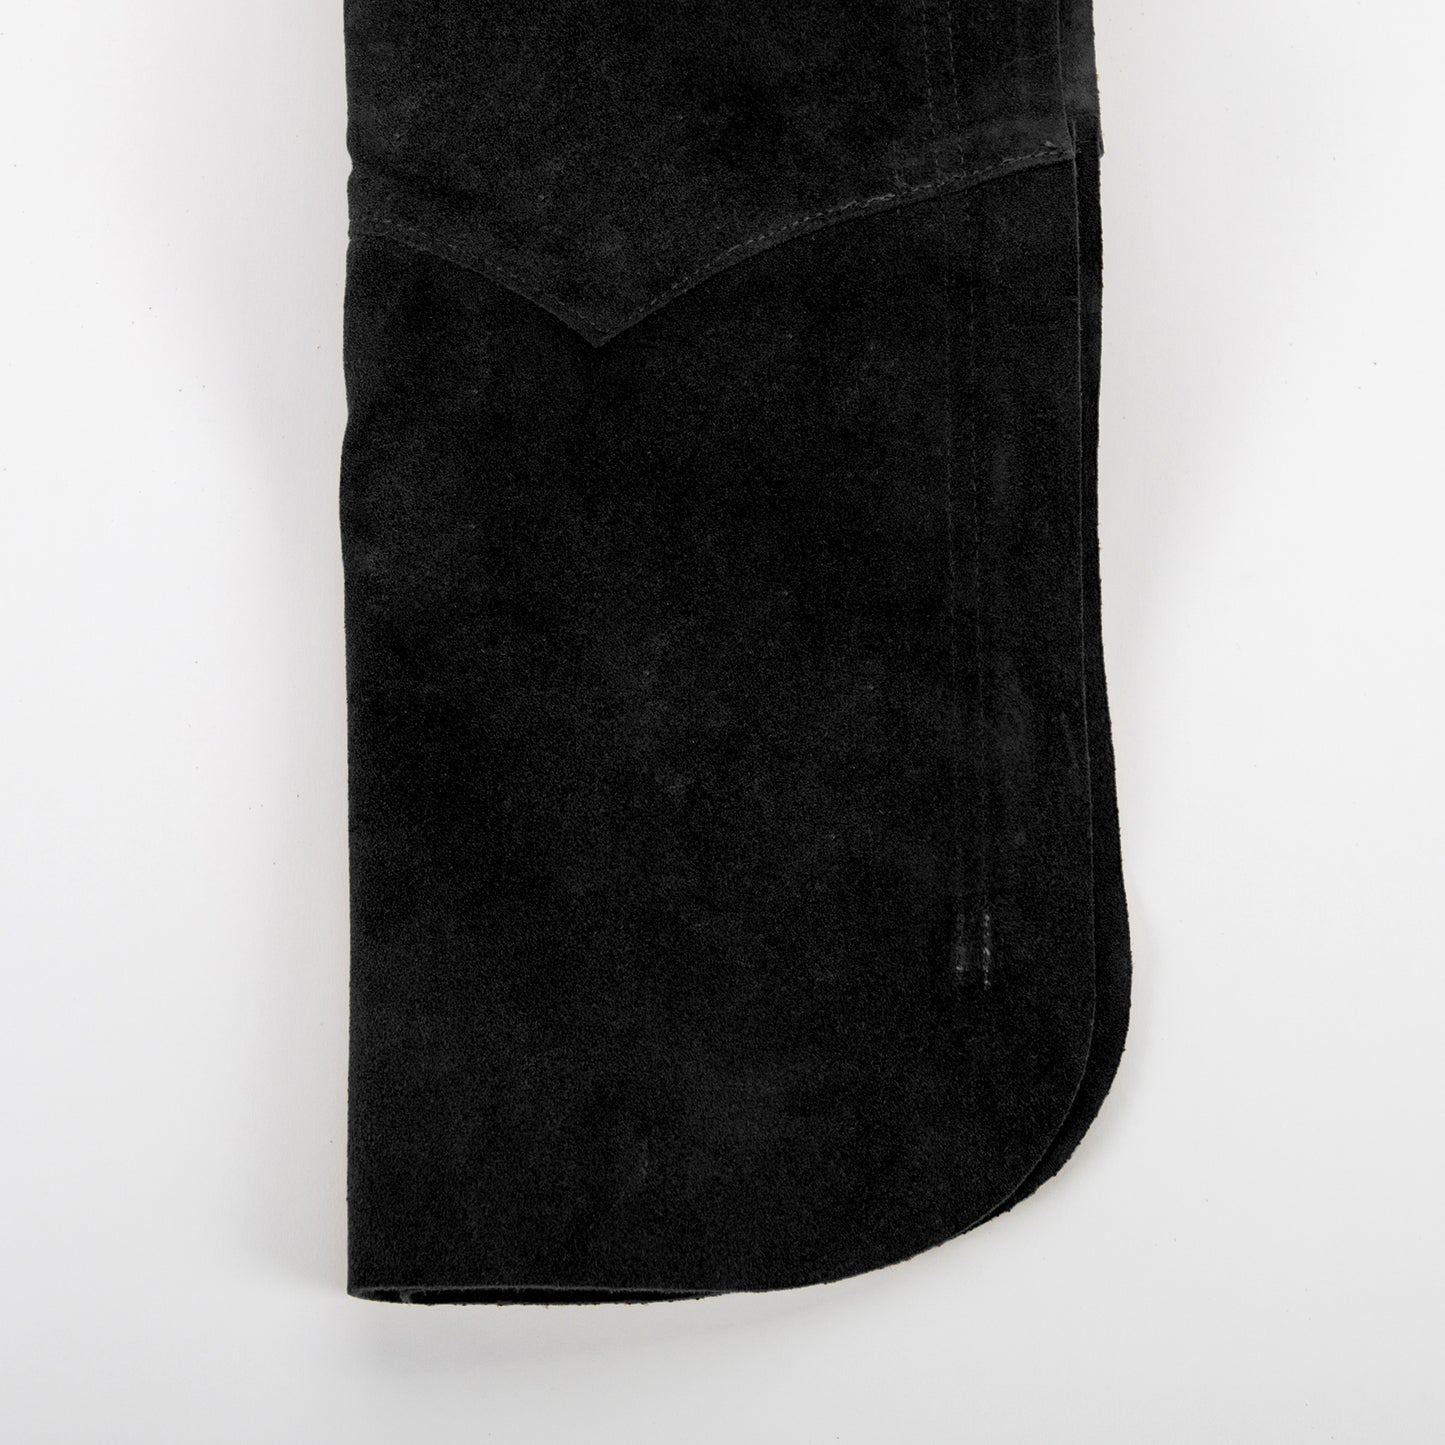 Western Boot Cut Chaps - Black Suede